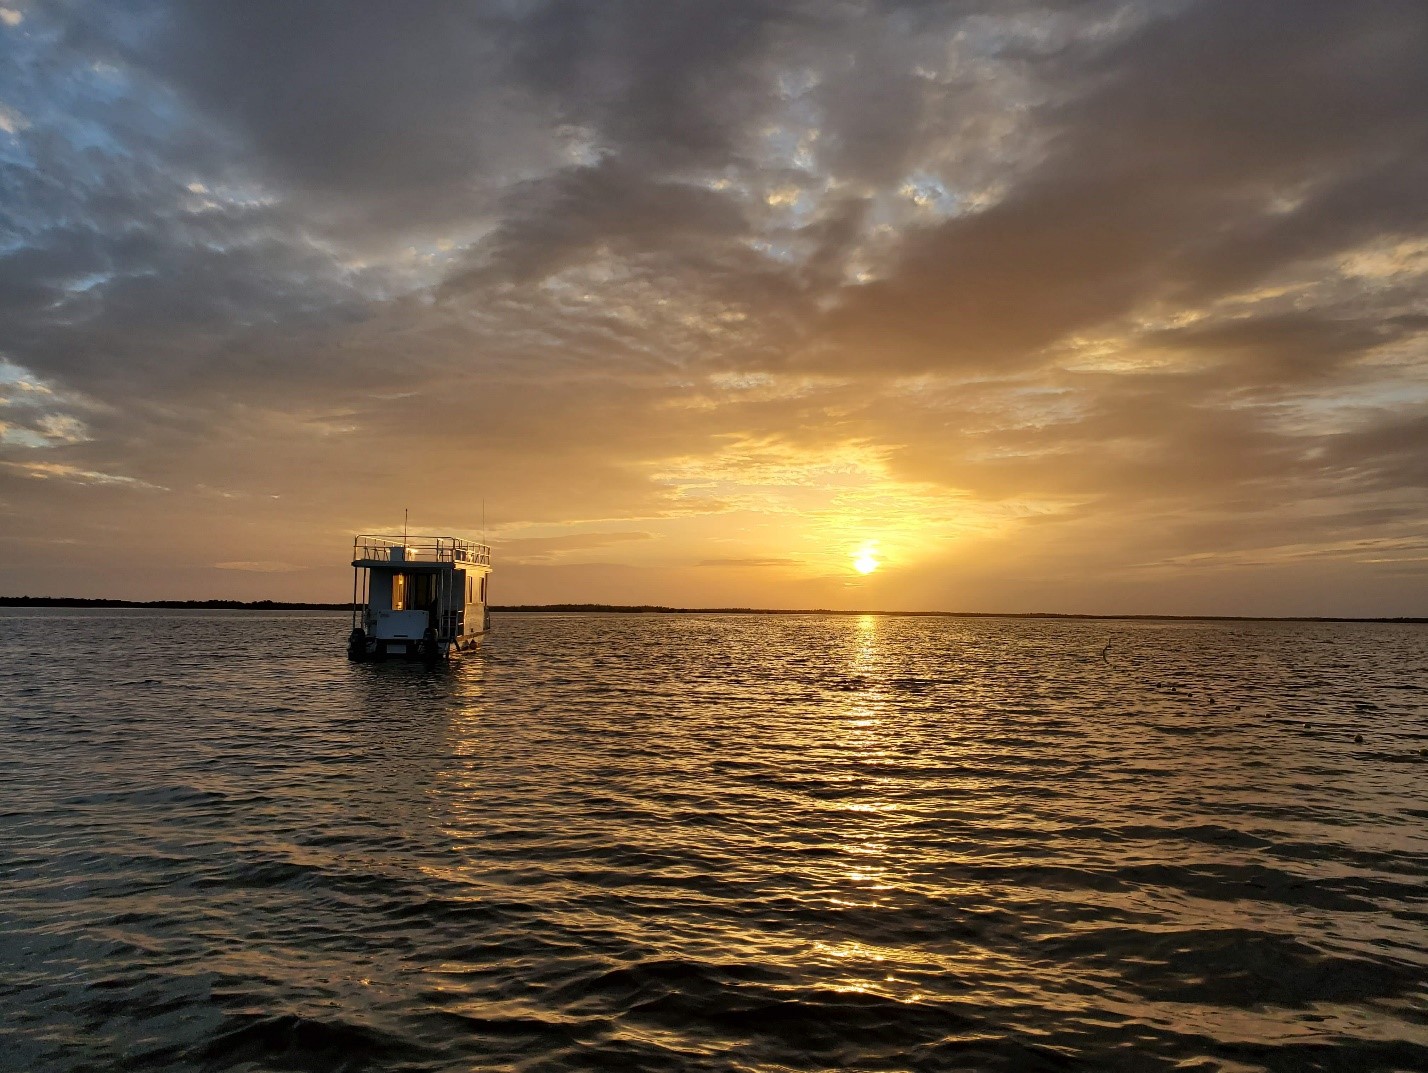 A boat floats in the water under a cloudy sunset.